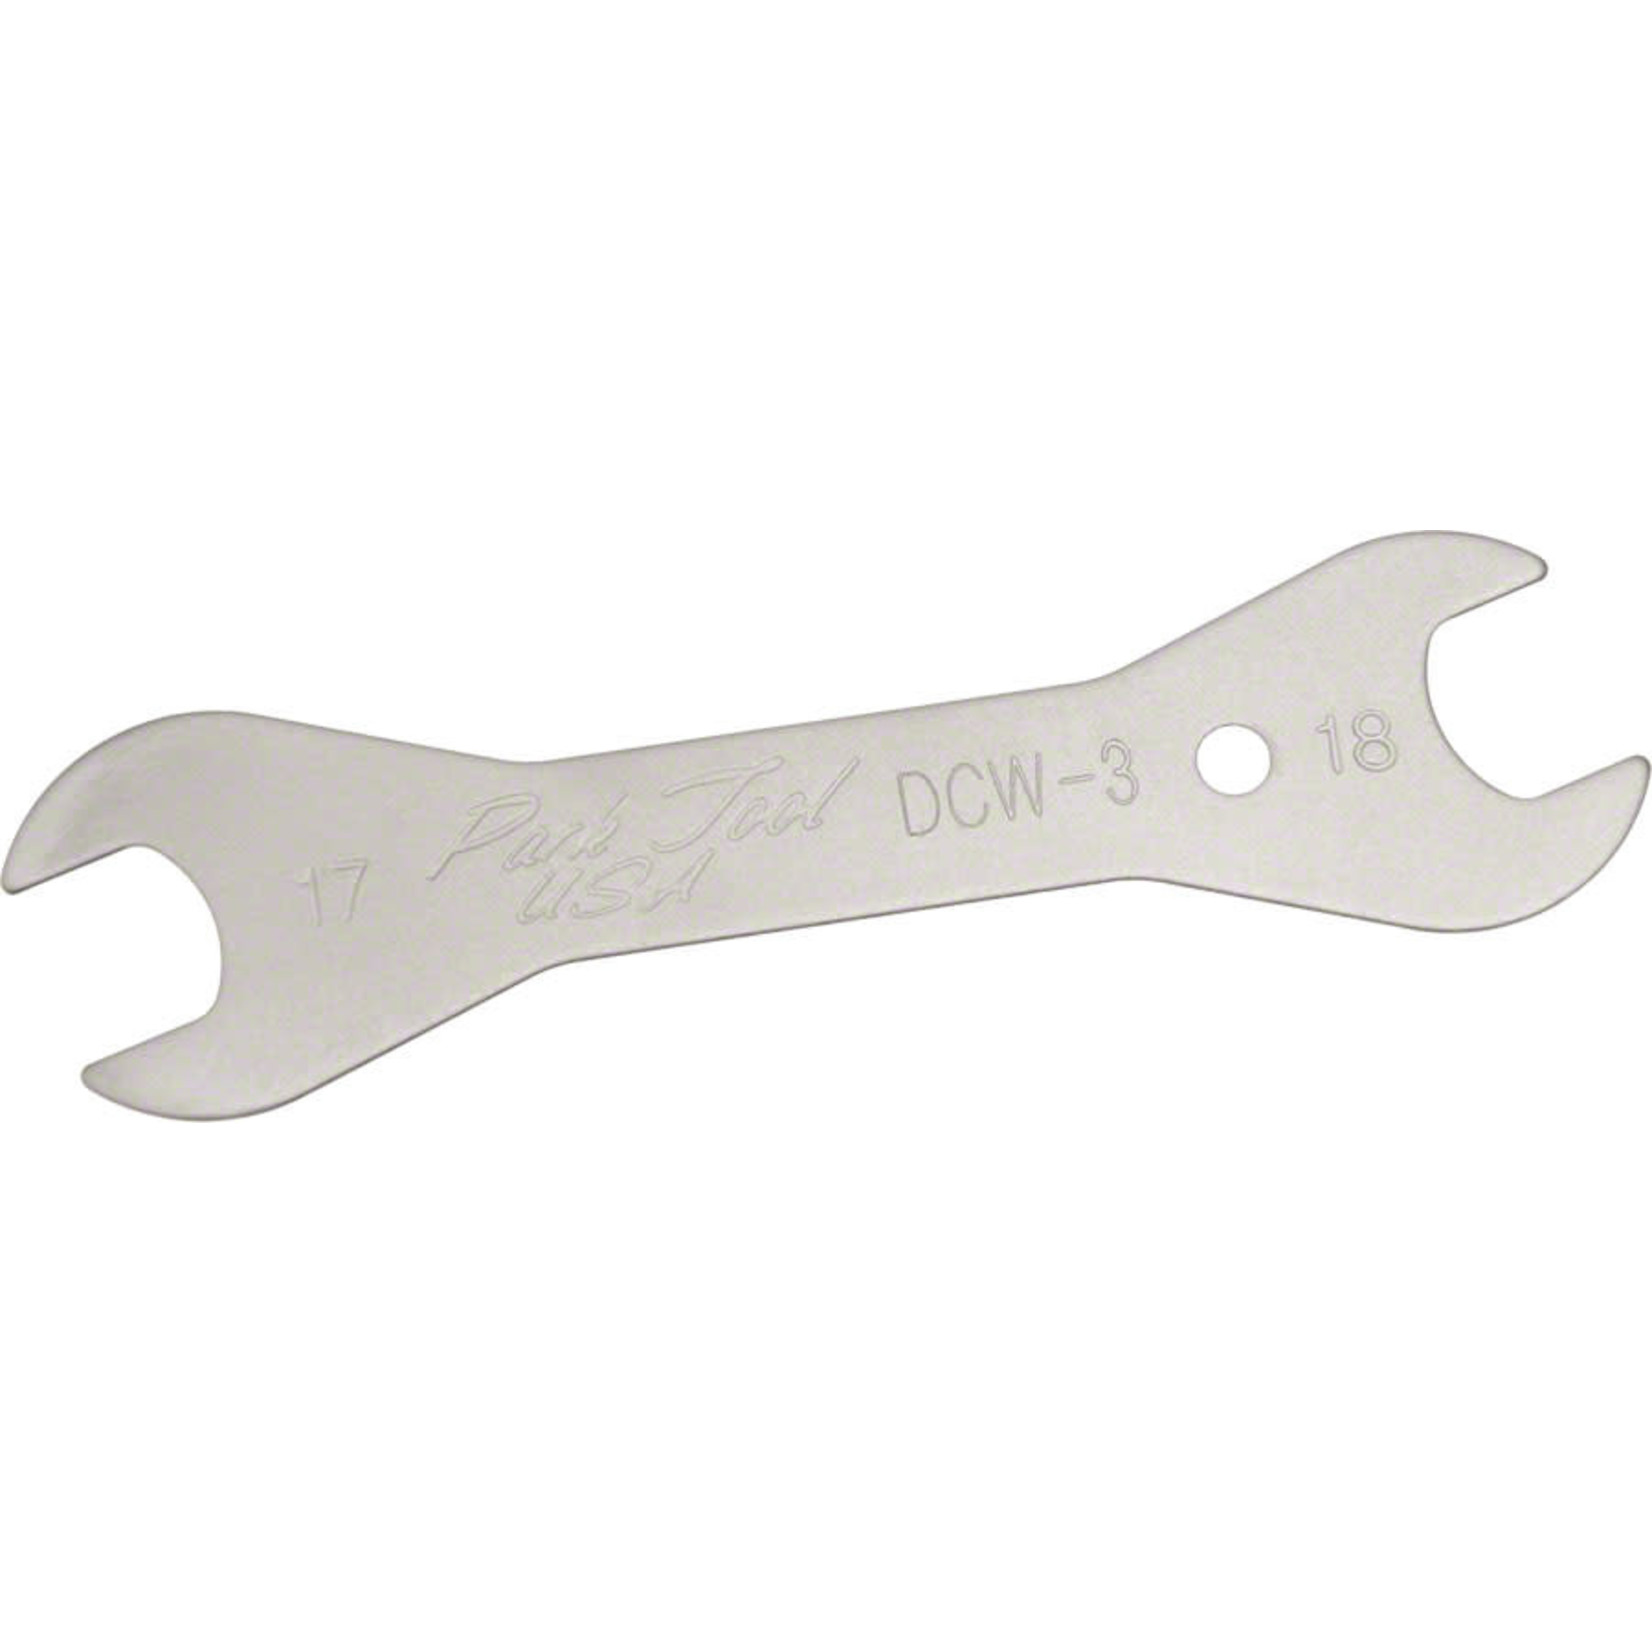 Park Tool Park Tool DCW-3 Double-Ended Cone Wrench: 17.0mm and 18.0mm